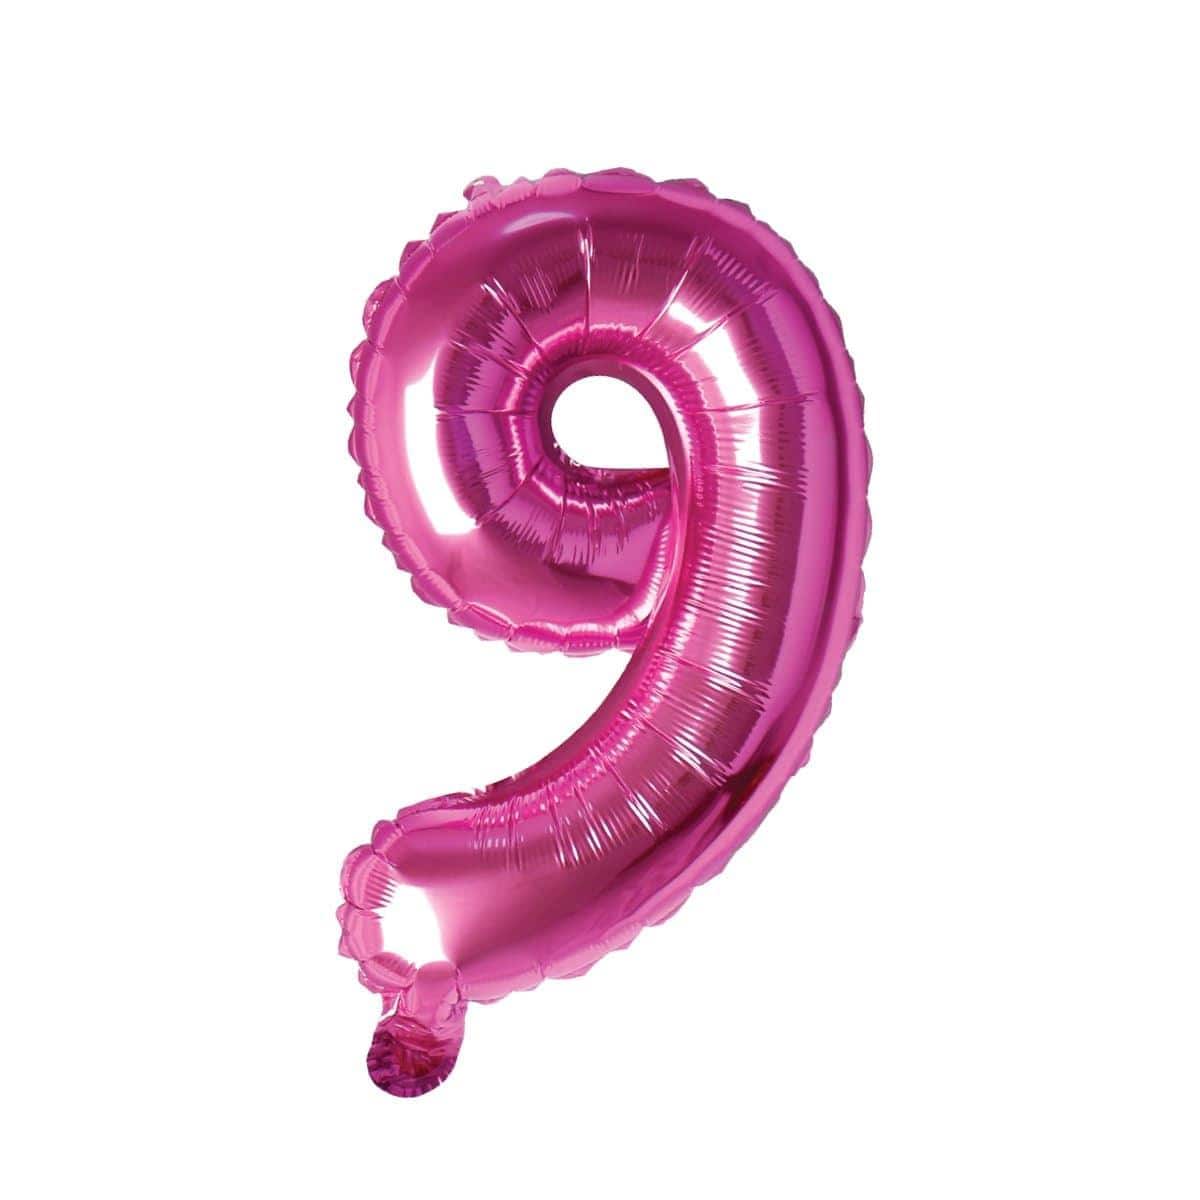 Buy Balloons Pink Number 9 Foil Balloon, 16 Inches sold at Party Expert